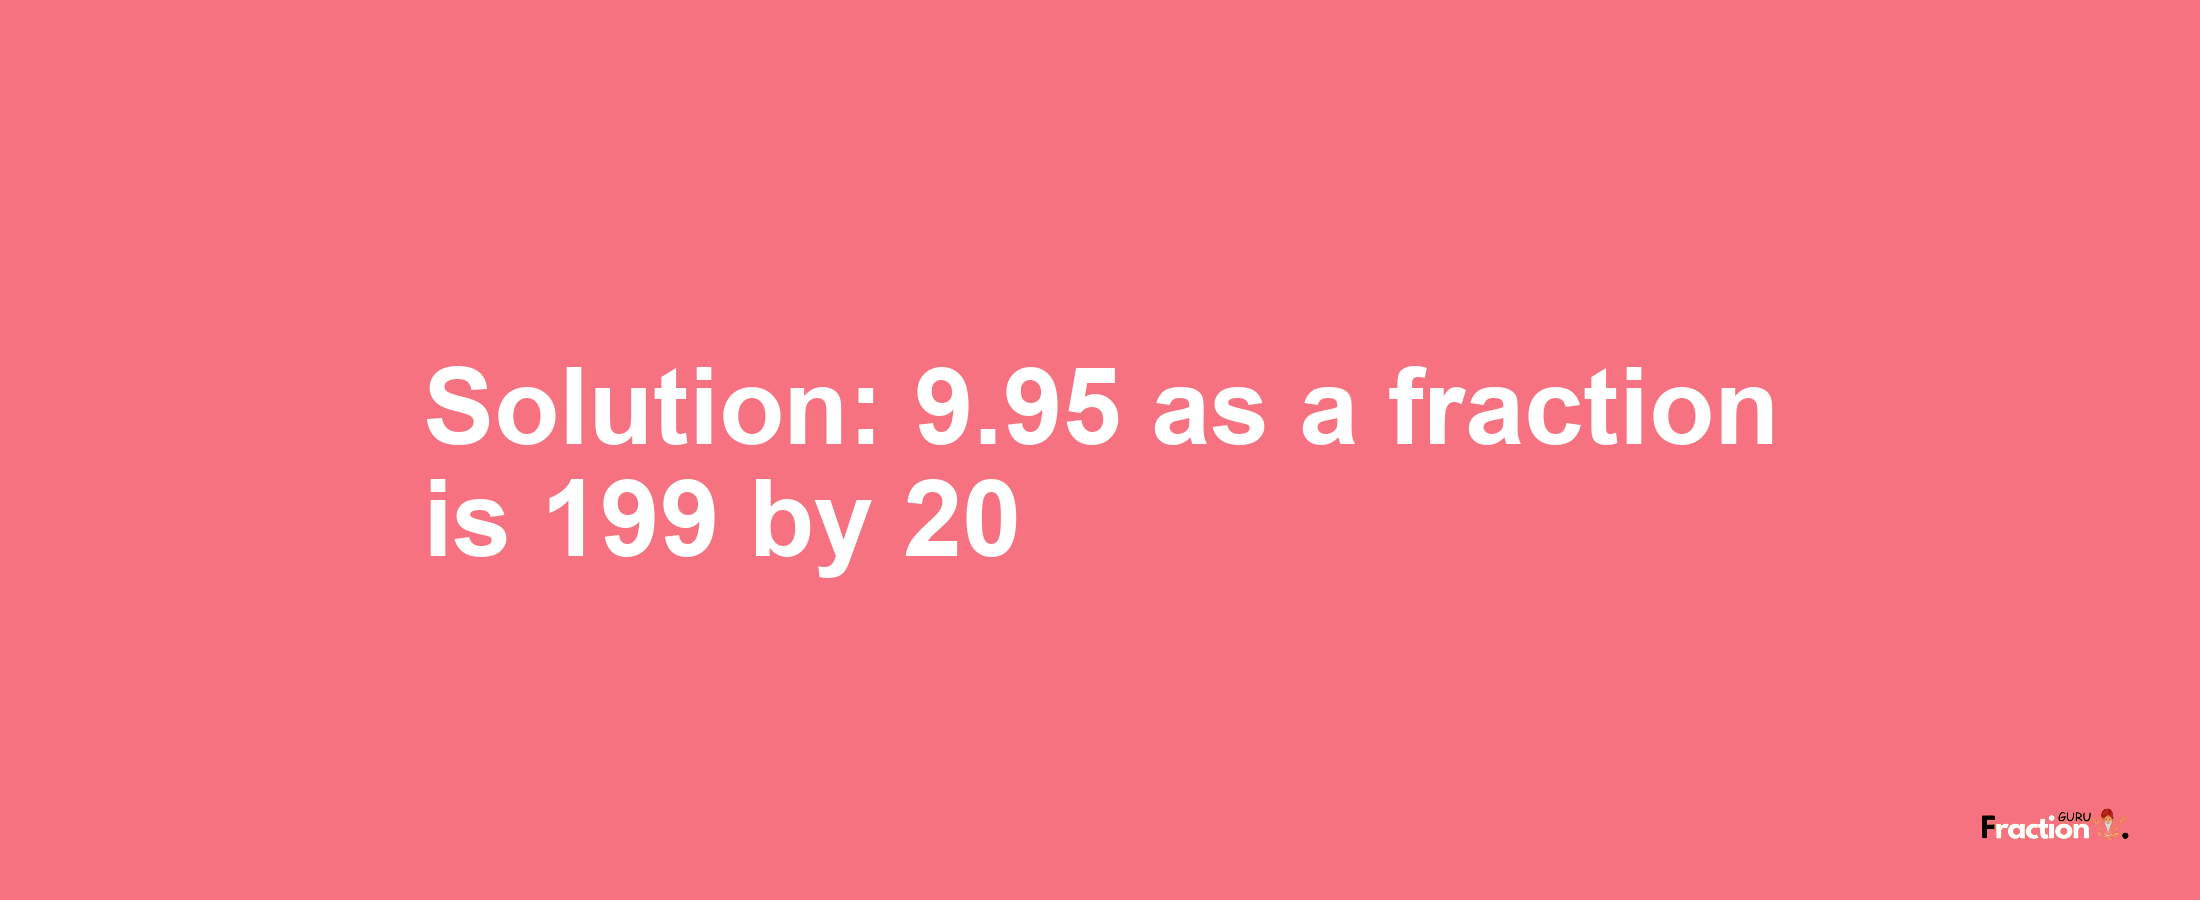 Solution:9.95 as a fraction is 199/20